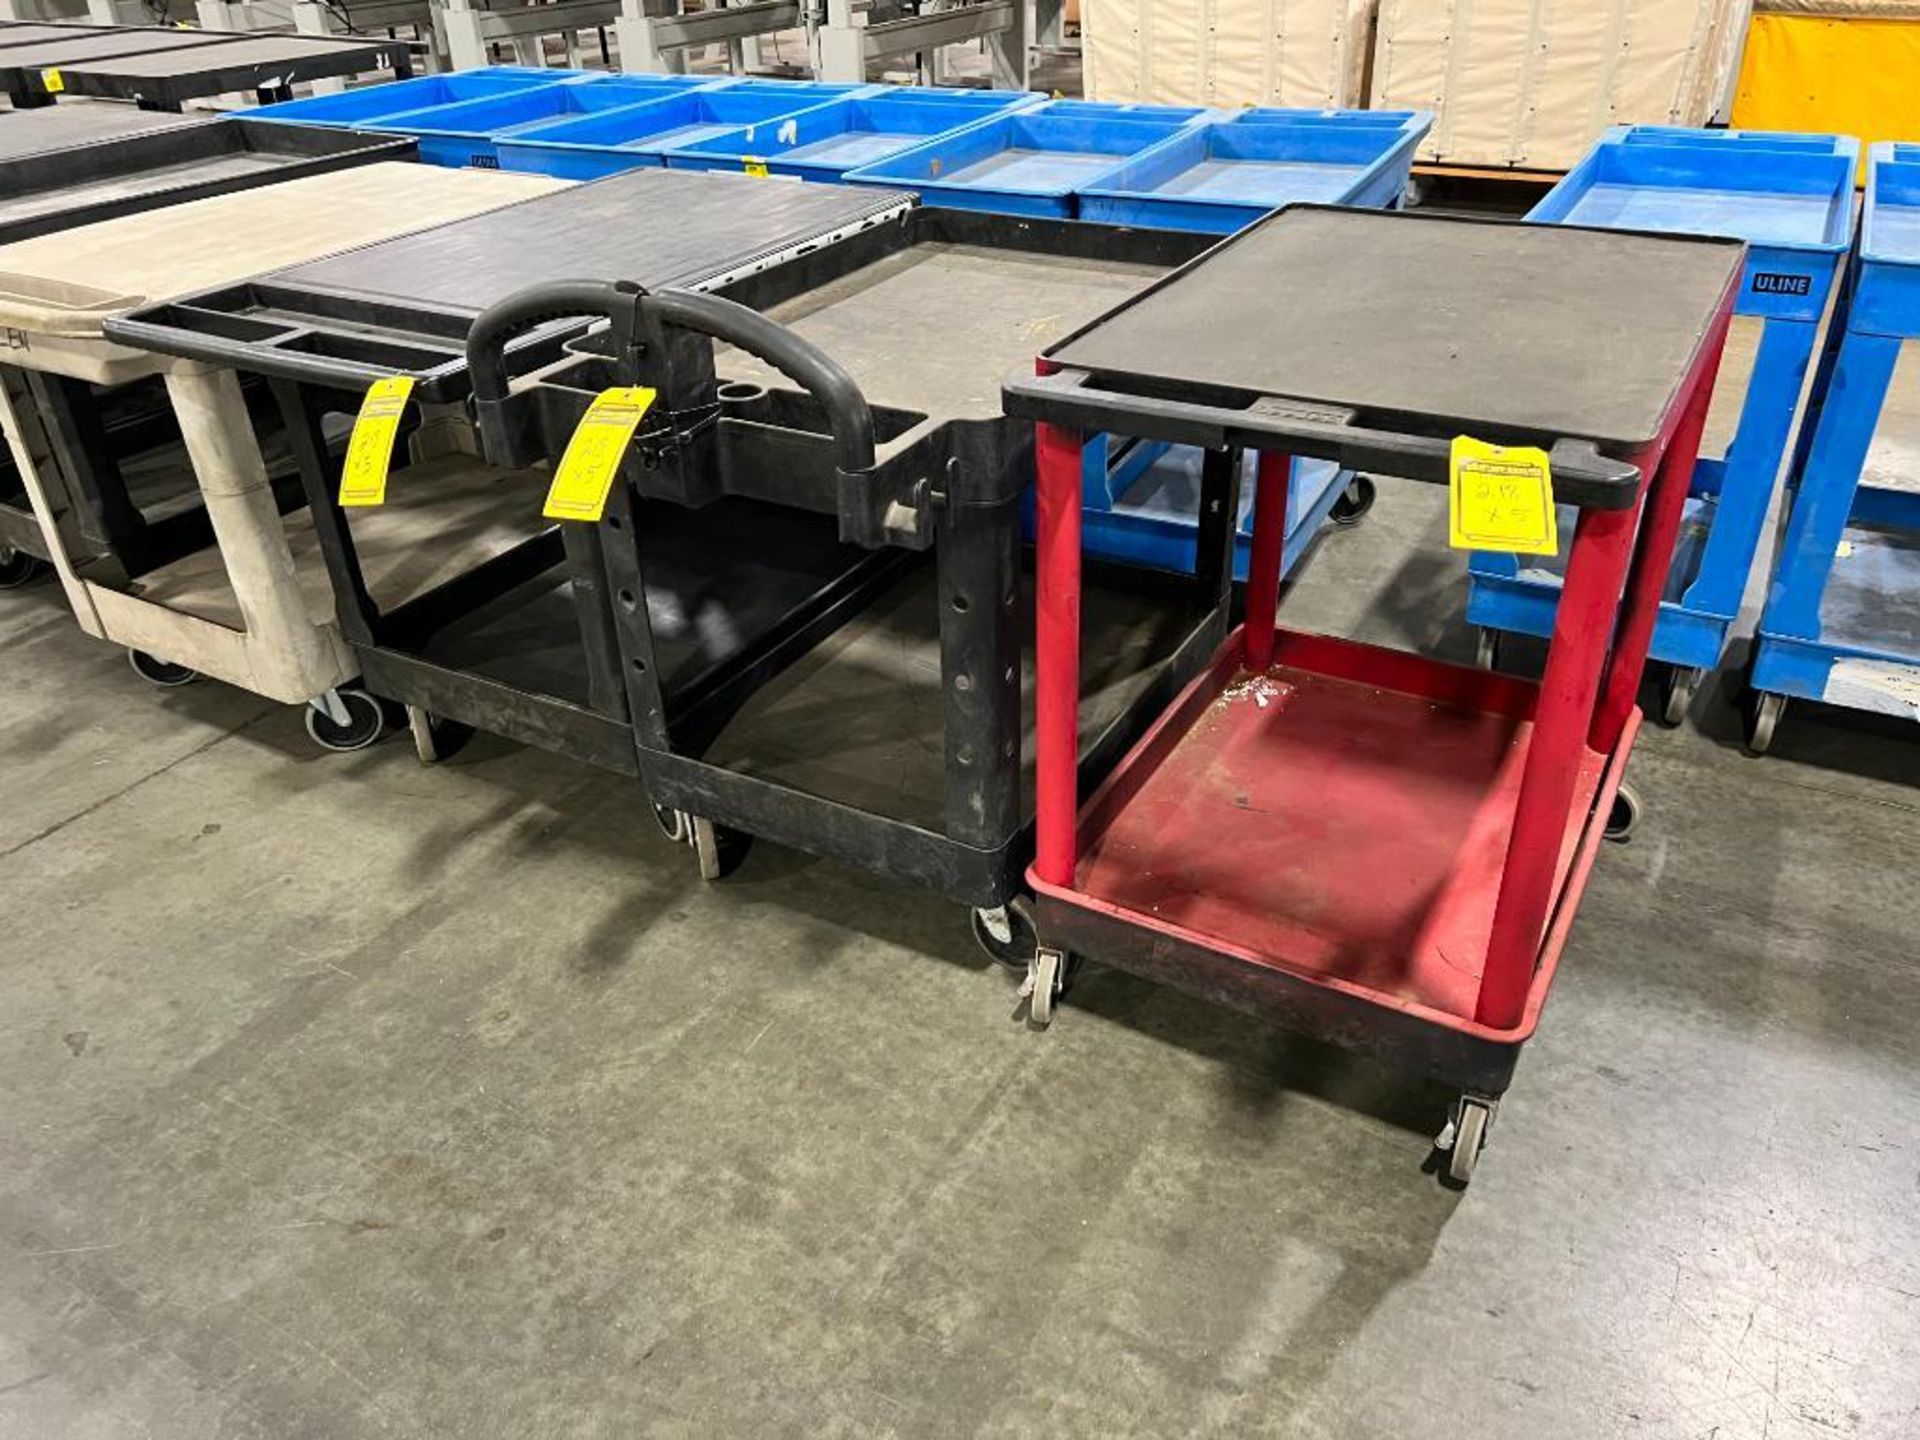 (5x) Rolling Utility Carts; Luxor, Uline, Rubbermaid ($20 Loading Fee Will Be Added To Invoice)